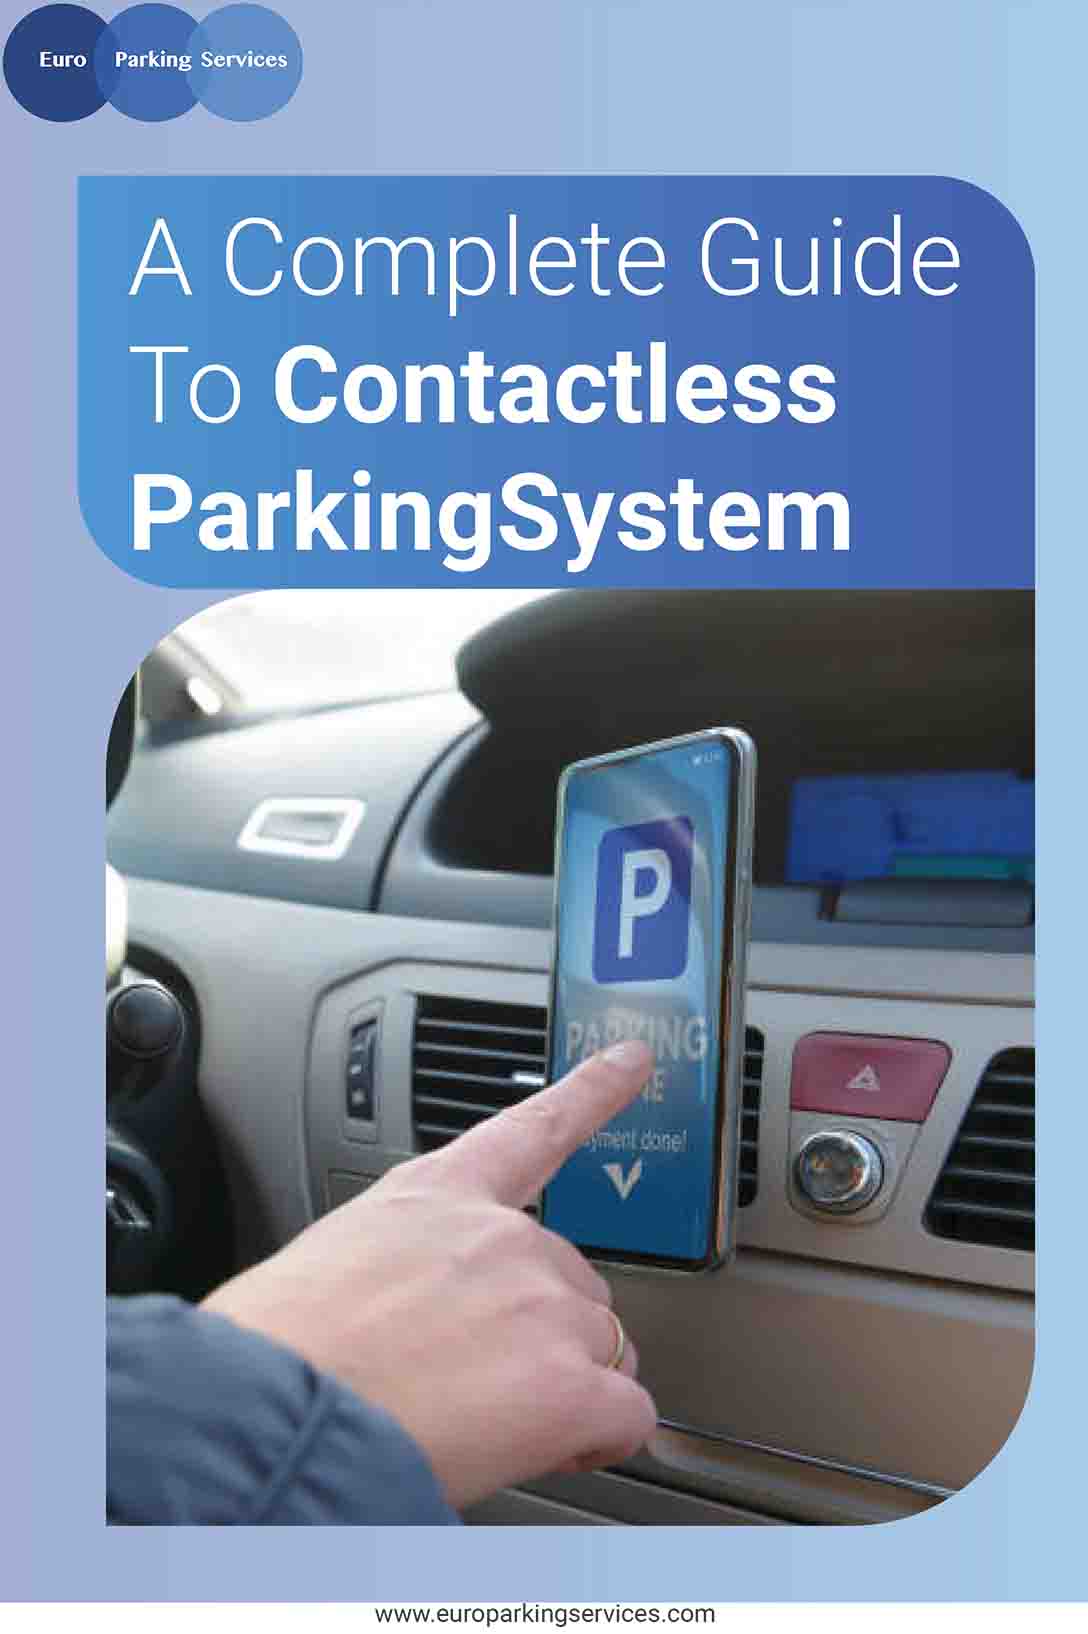 A Complete Guide To Contactless Parking System